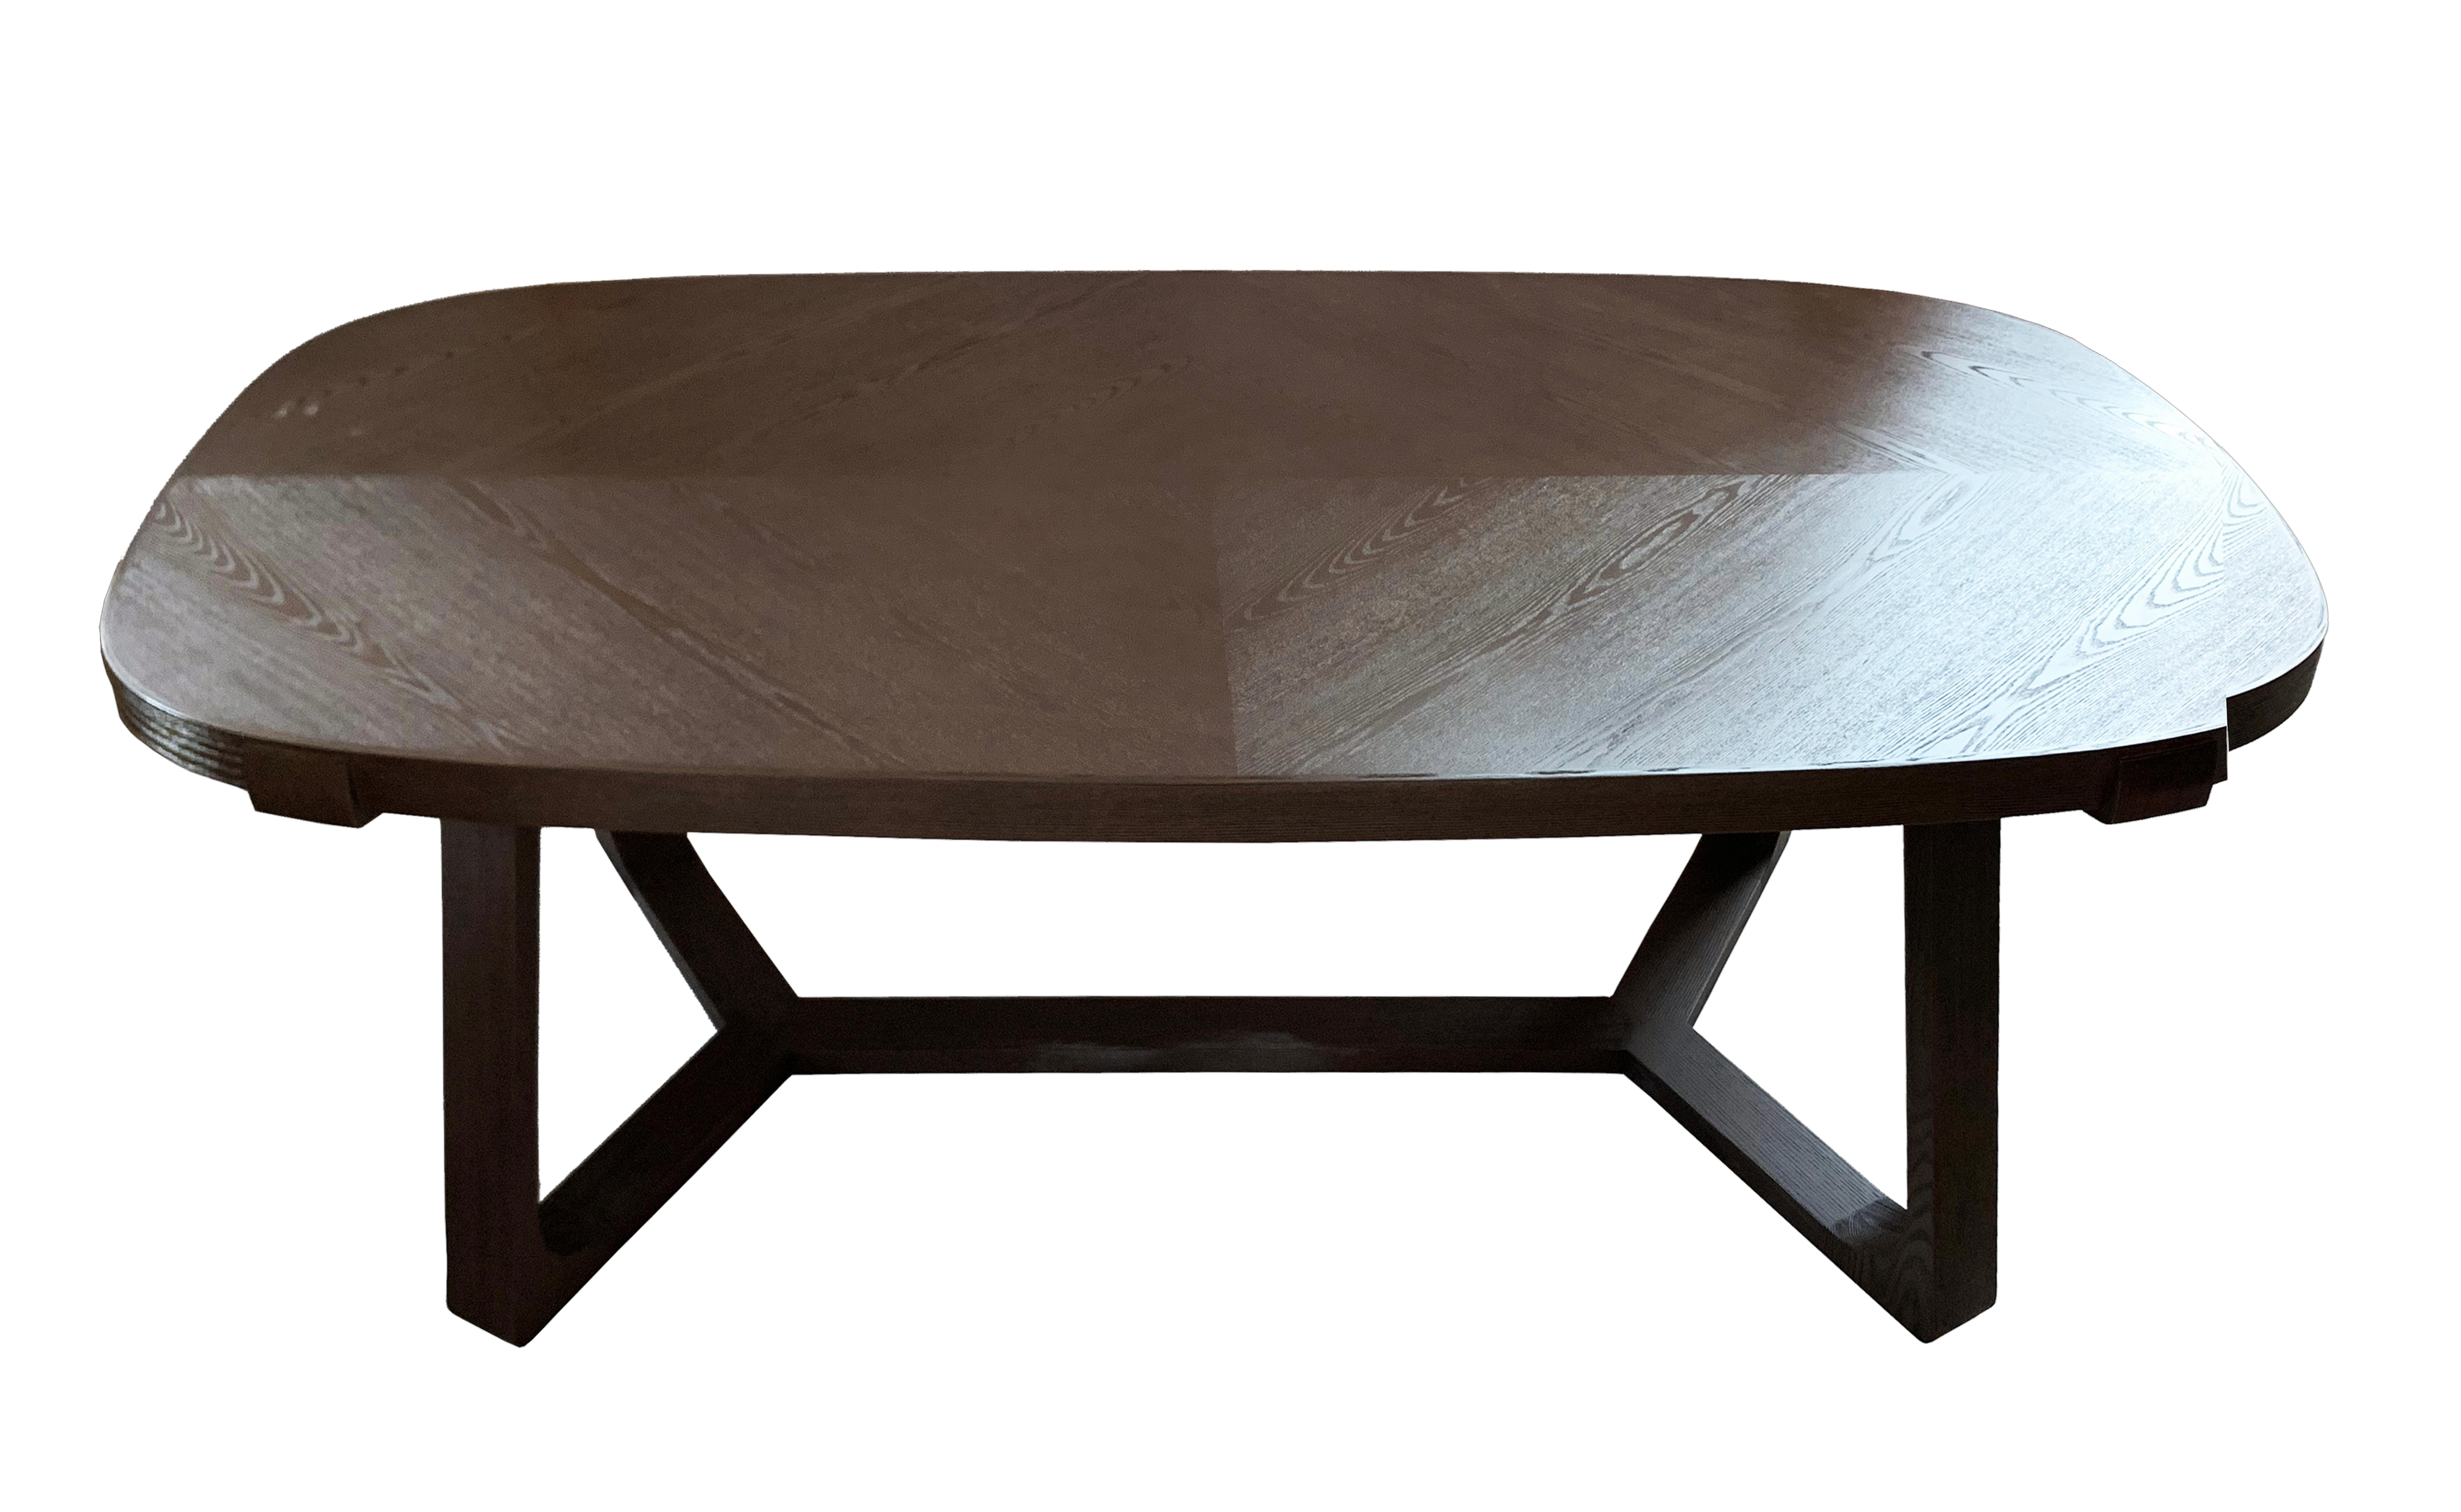 our timeless dining table is conceived to embrace a modern interpretation to traditional interlocking timber furniture. crafted in solid oak with an oval top, the table is adorned with intricate detailing and highly poetic profiles. available in a